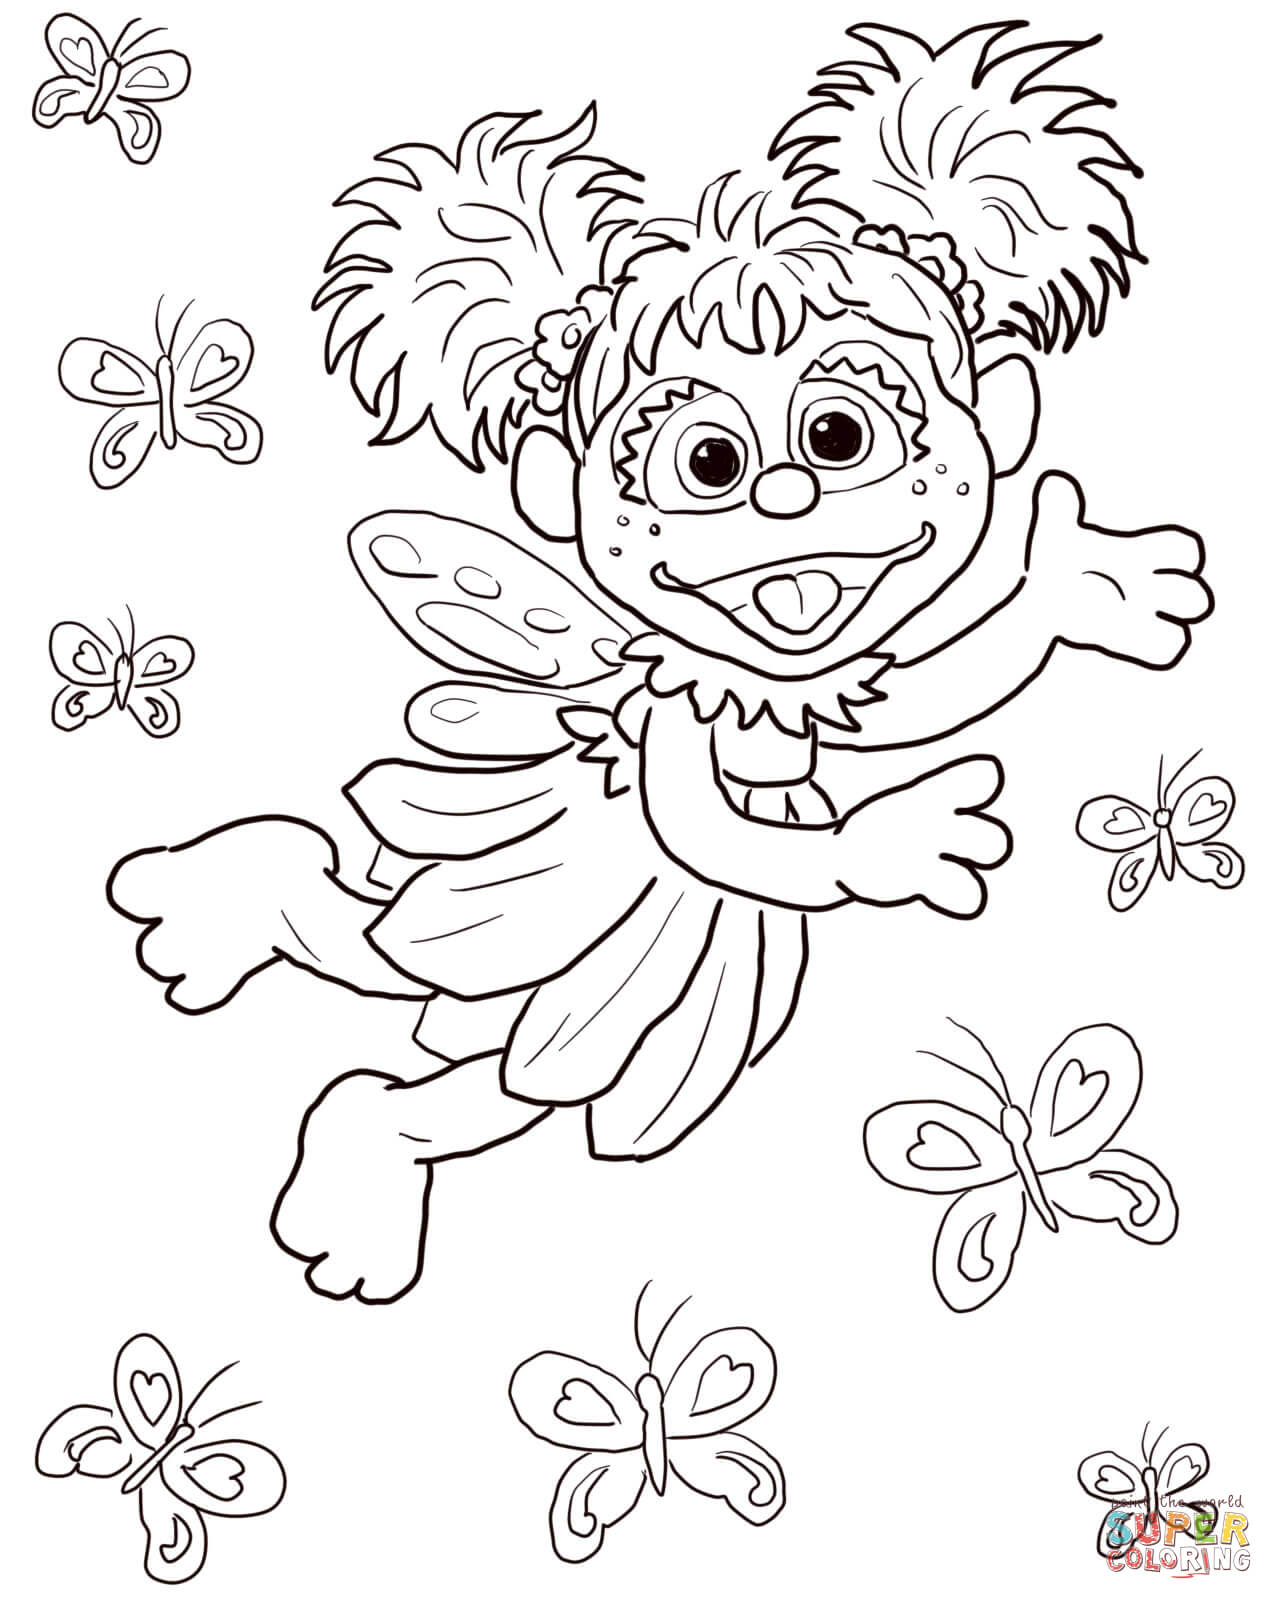 Sesame Street Bert And Ernie Coloring Pages - Coloring Home